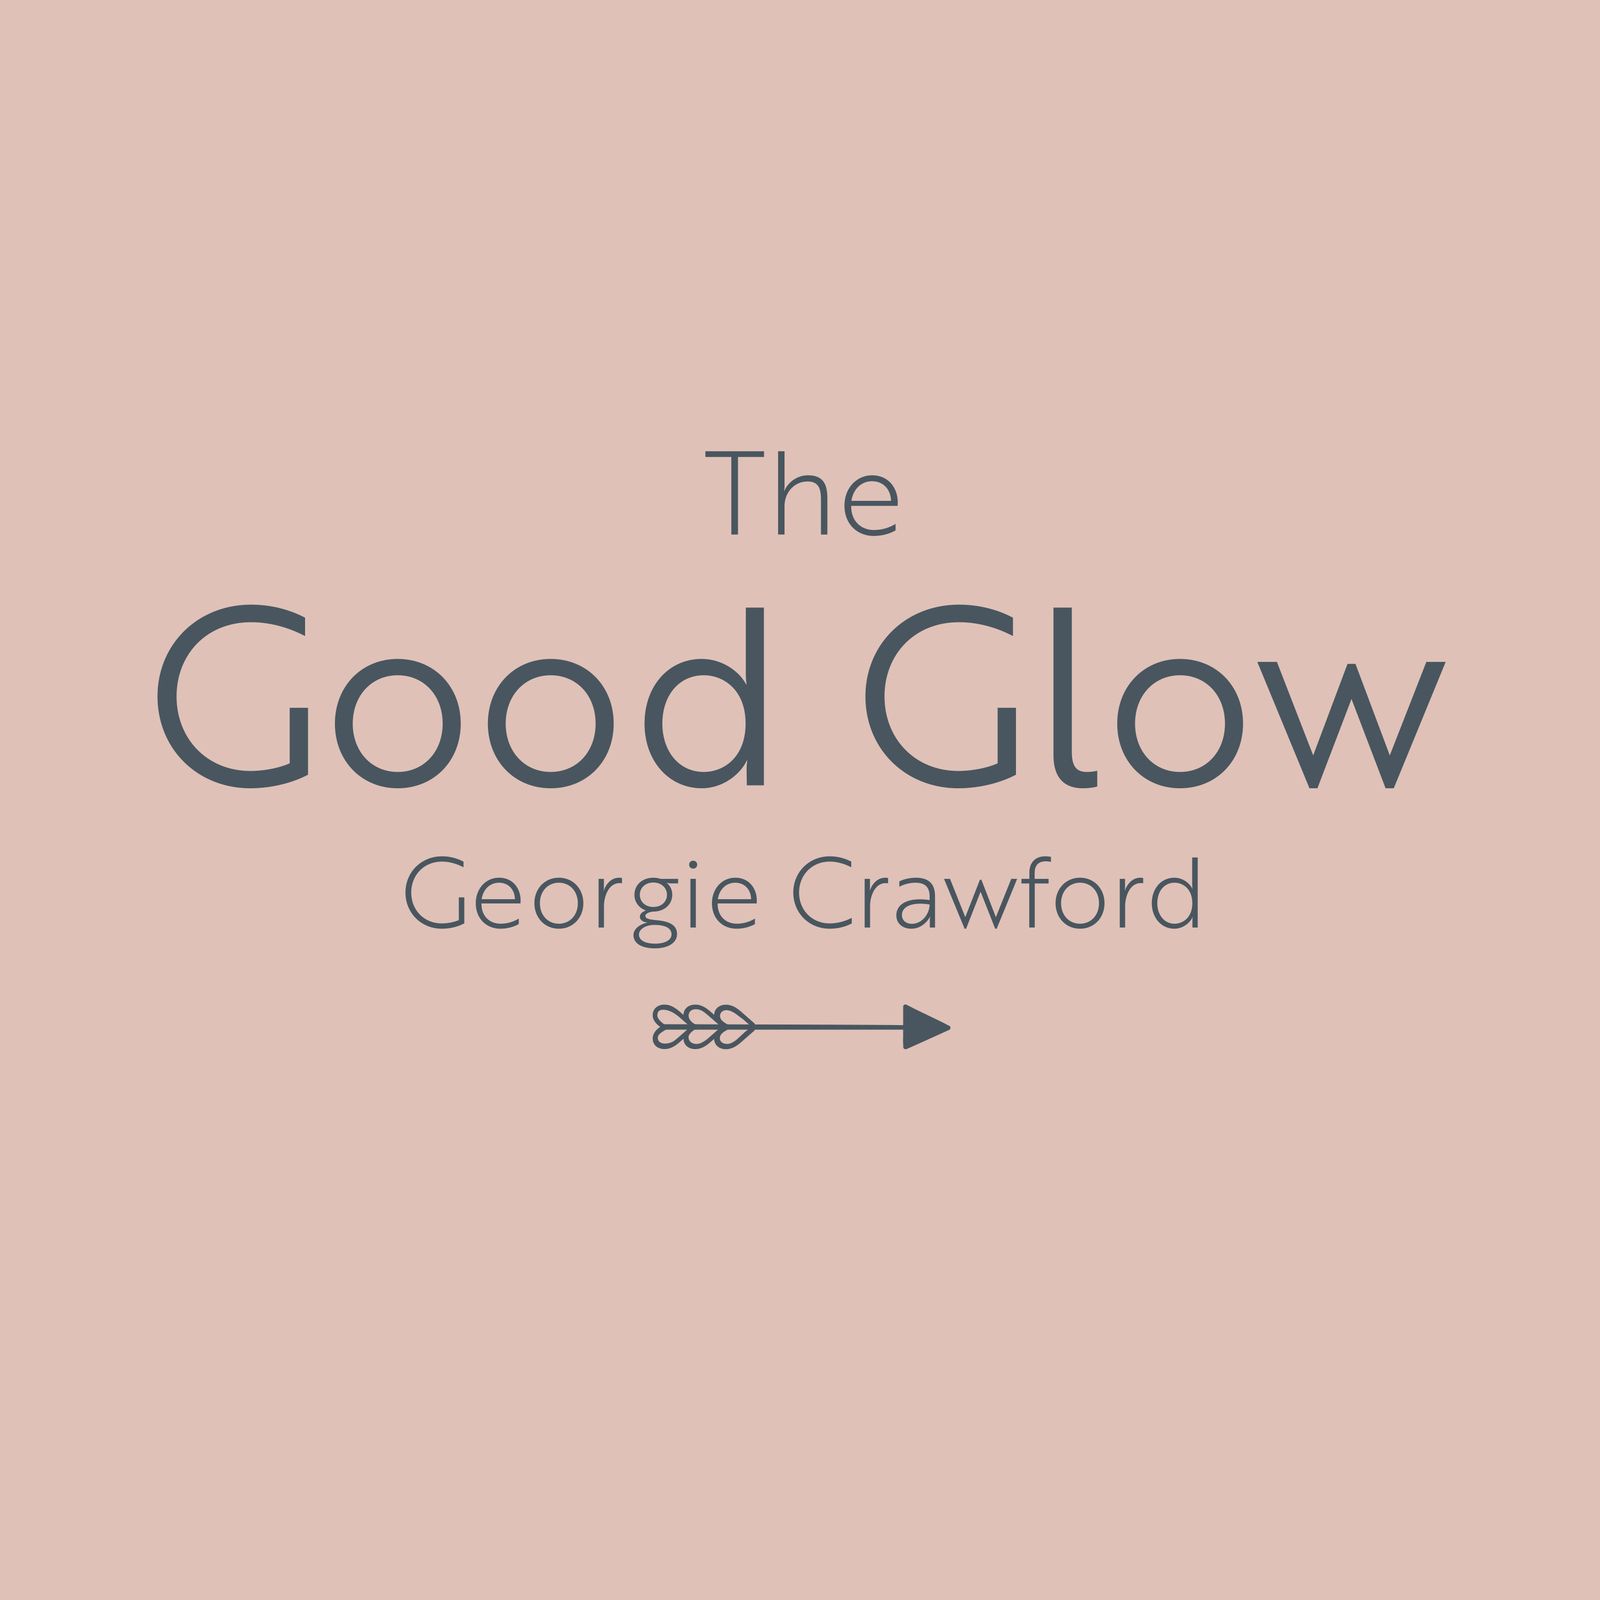 S12 Ep6: The Good Glow - Gerry Hussey 2022